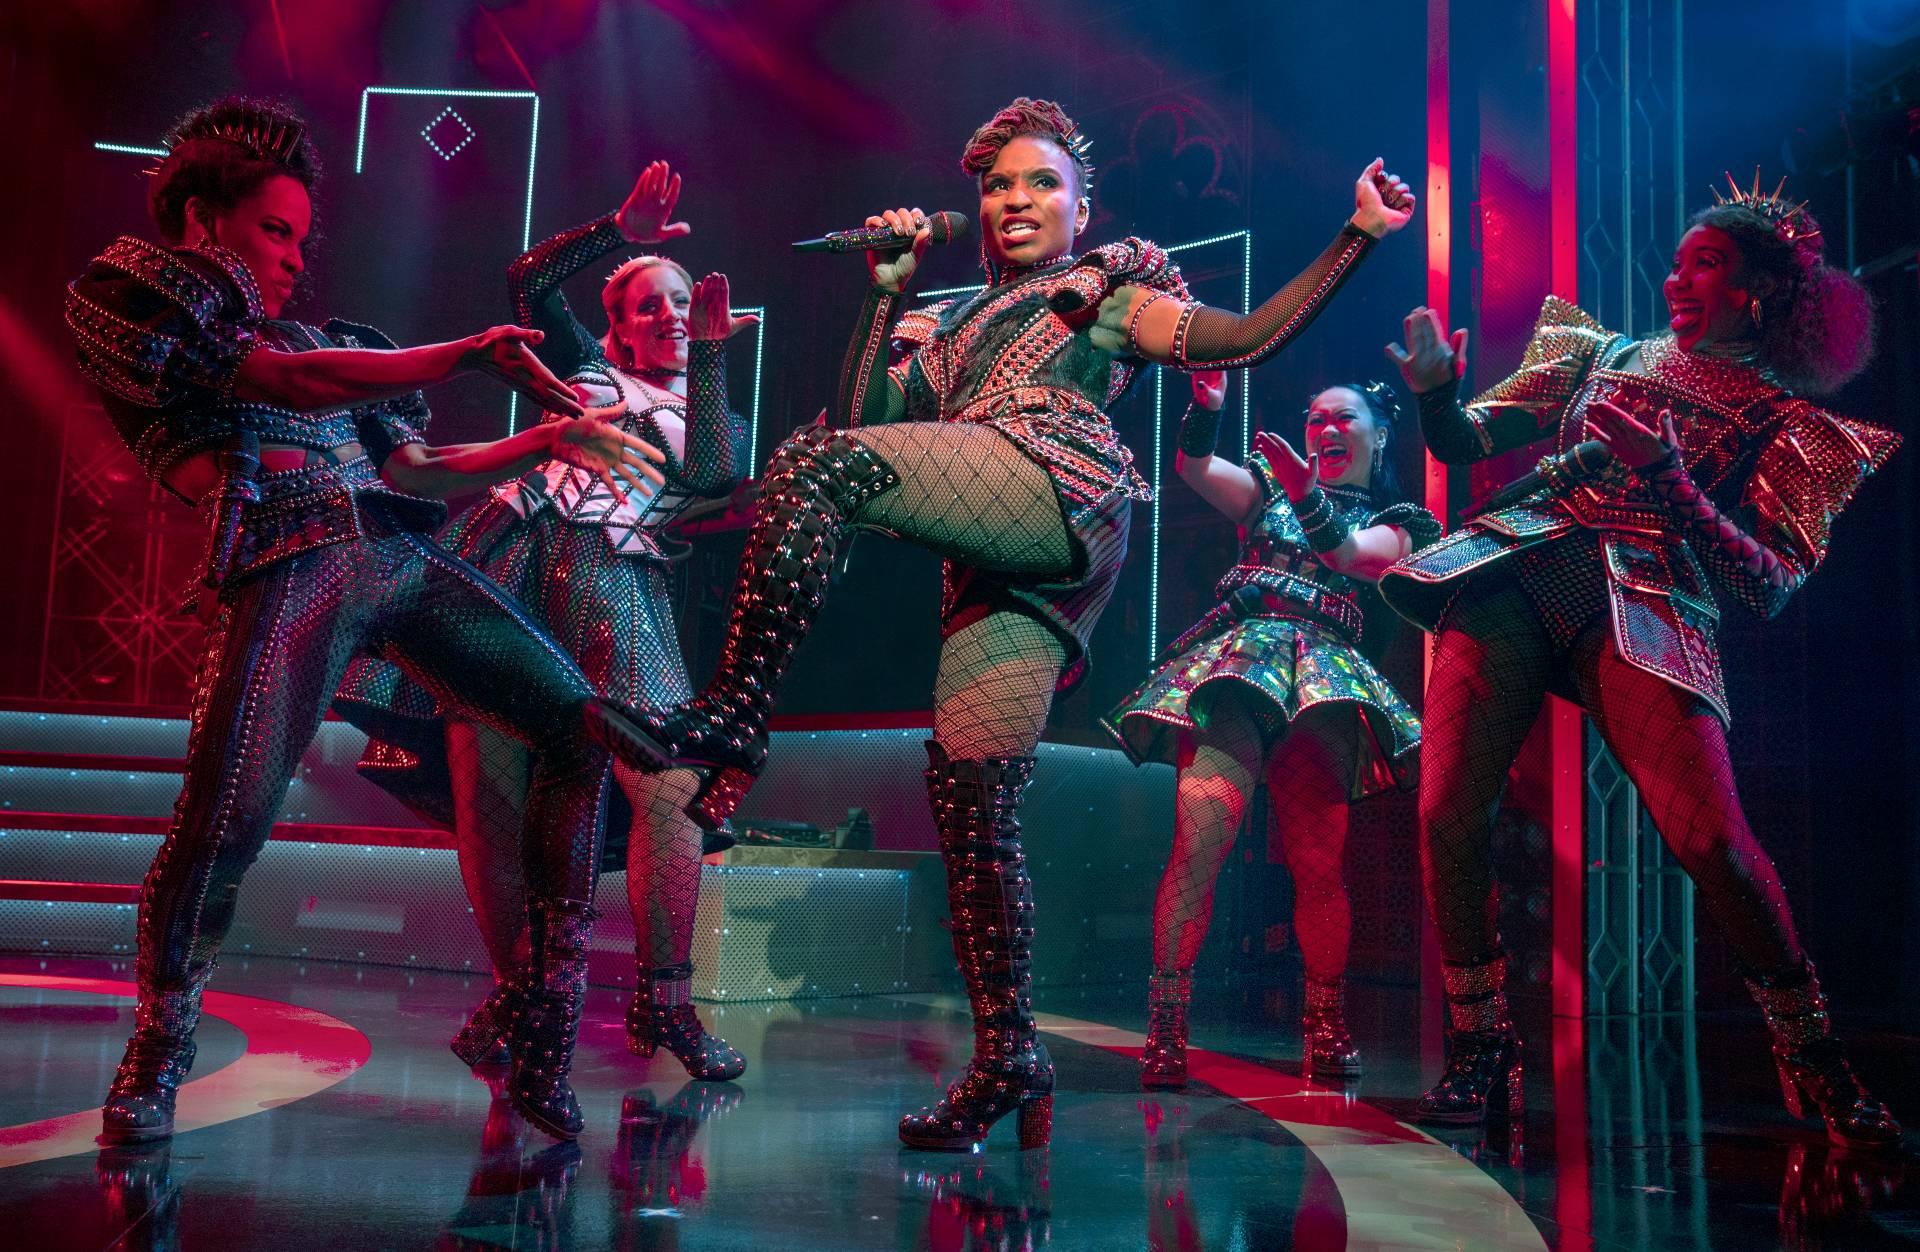 Brittney Mack portrays Anna of Cleves, center, during a performance of the musical “Six,” at Broadway’s Brooks Atkinson Theatre in New York. Mack is slated to perform a mashup of some of its songs with her castmates and band in front of a televised audience of millions at the Macy’s Thanksgiving Day Parade. (Joan Marcus / Boneau / Bryan-Brown via AP)